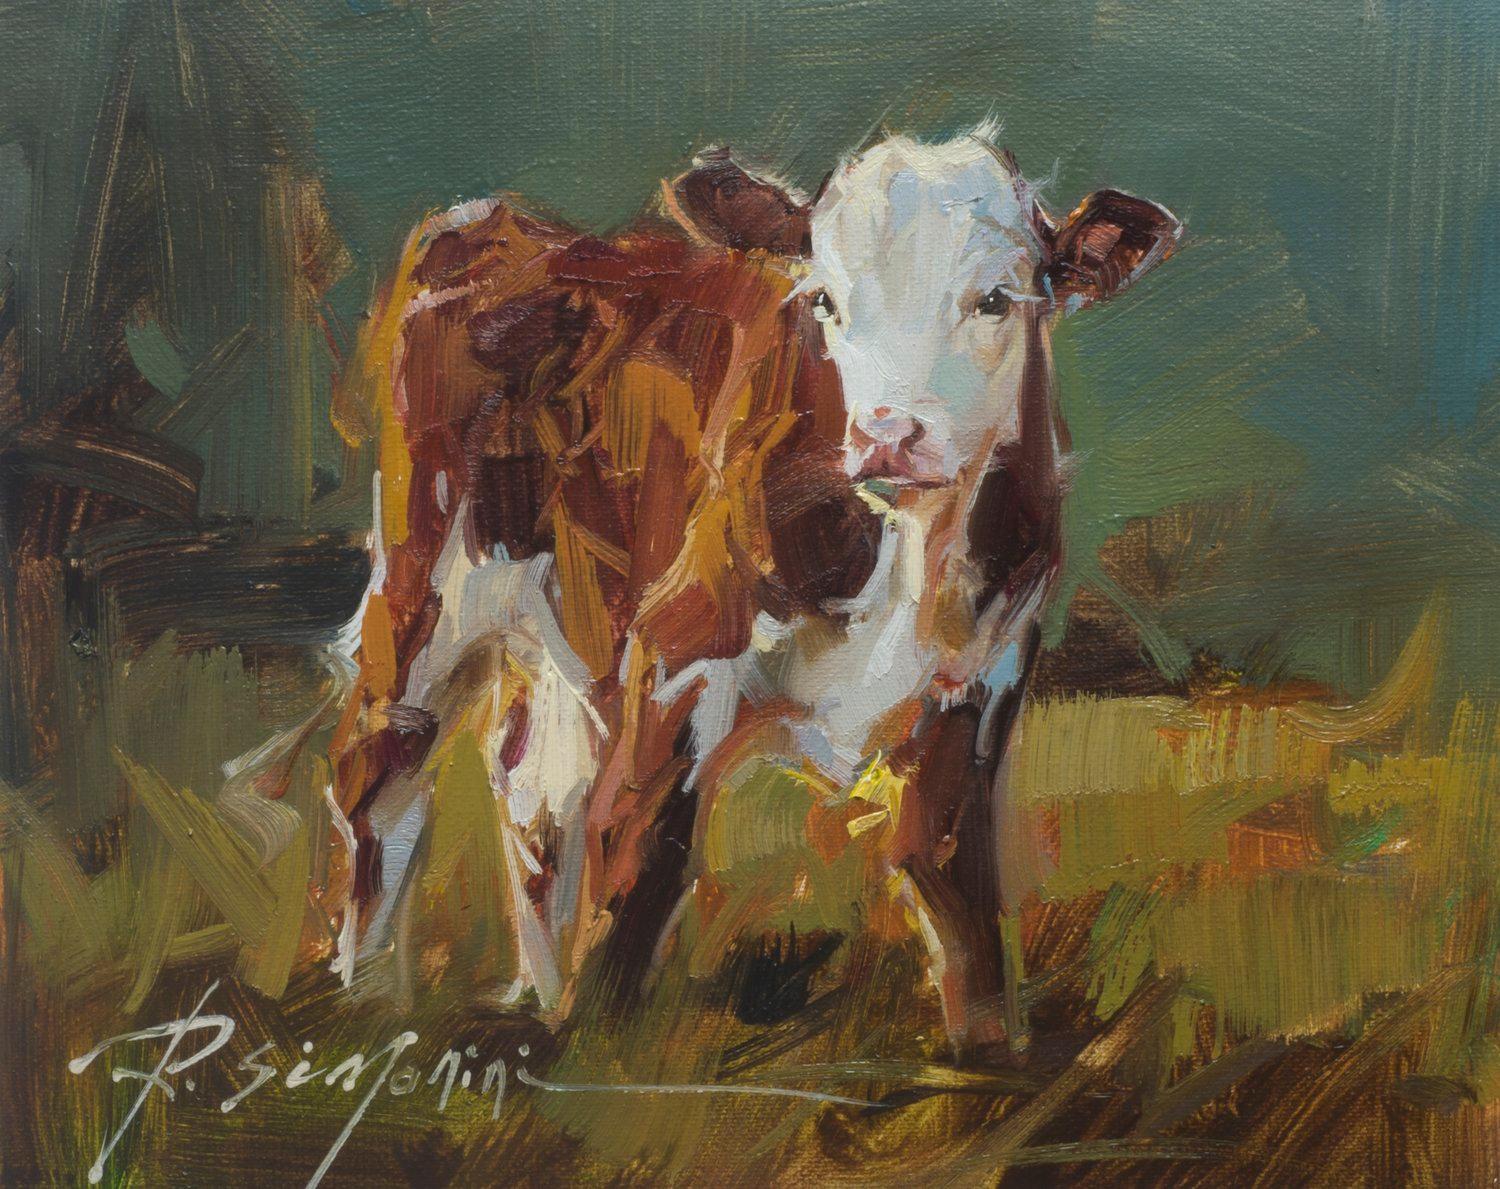 This painting by artist Ray Simonini titled "Violet" is a 8x10 farm animal oil painting on canvas featuring a portrait of a brown and white cow standing in the grass of an expansive pasture. 

About the artist:
Simonini was born in China in 1981. He